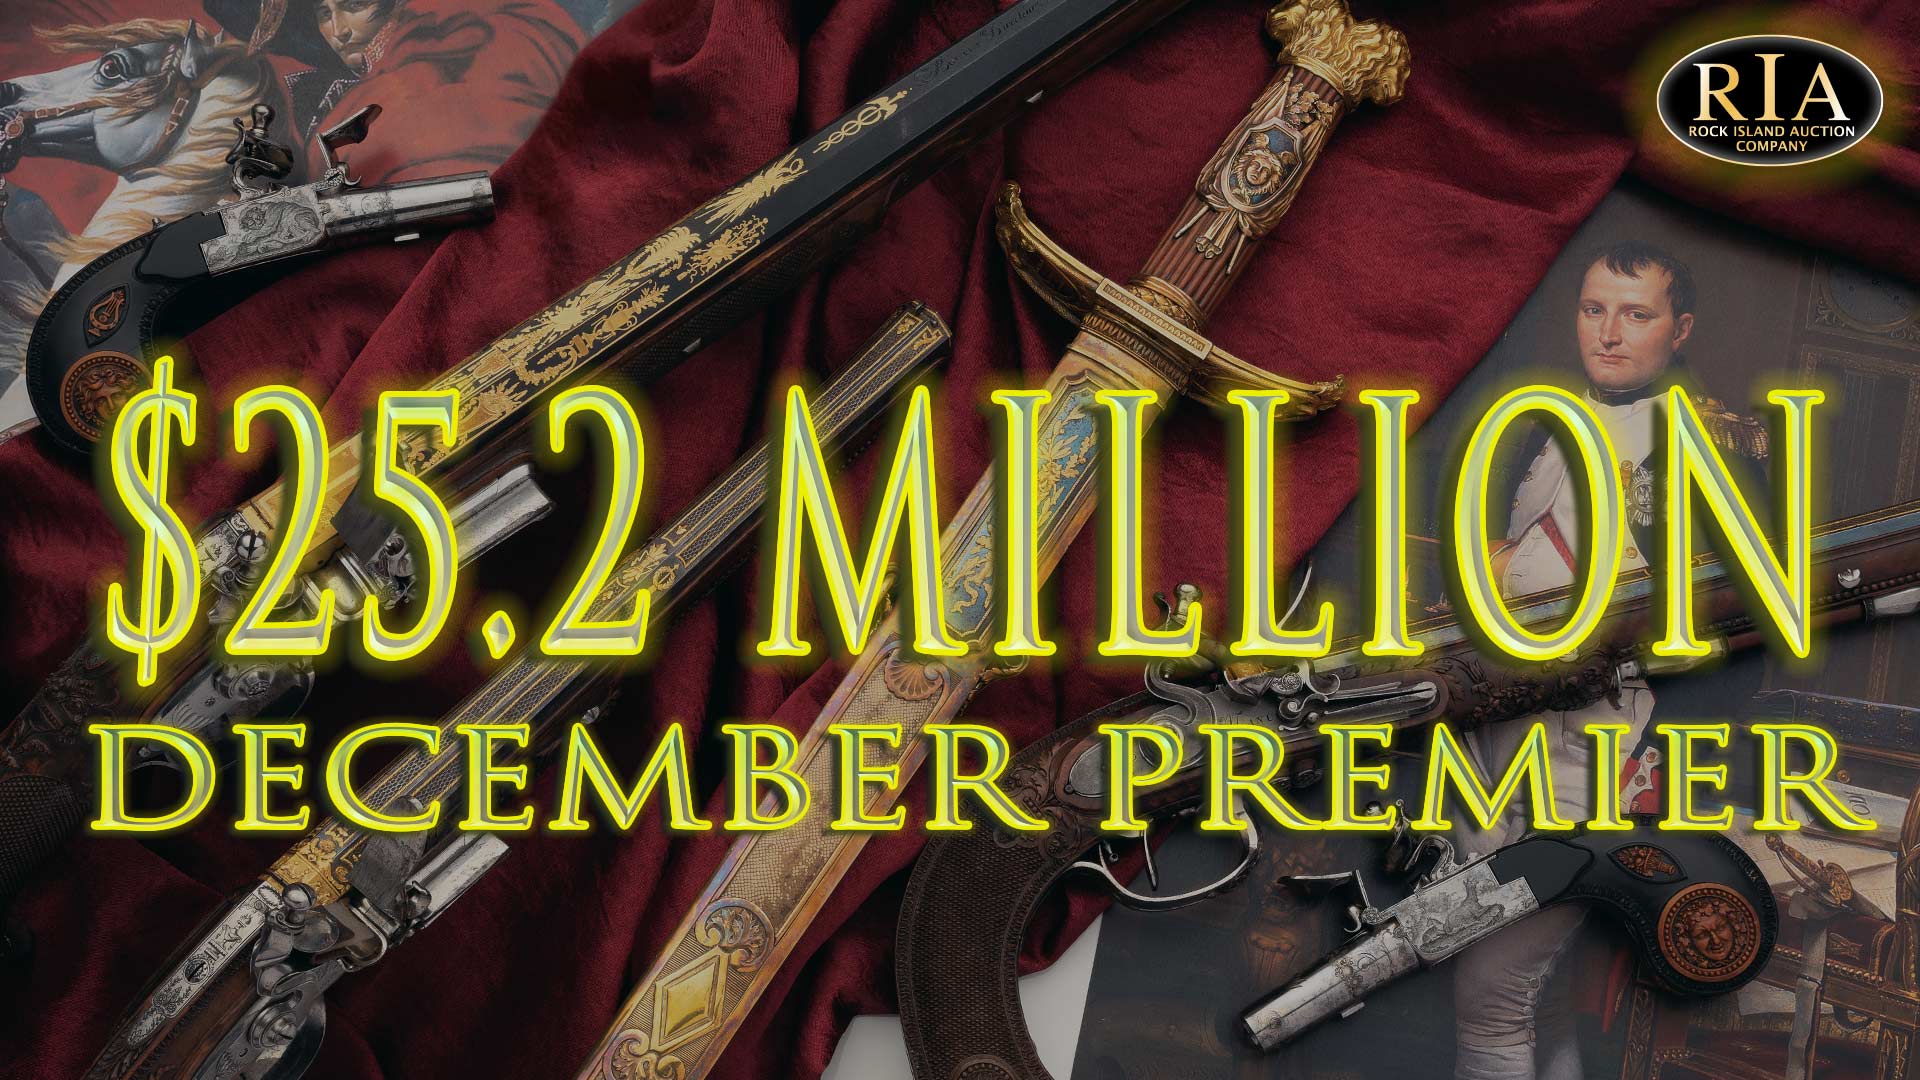 Napoleon Conquers in Second-Largest Firearms Auction in History